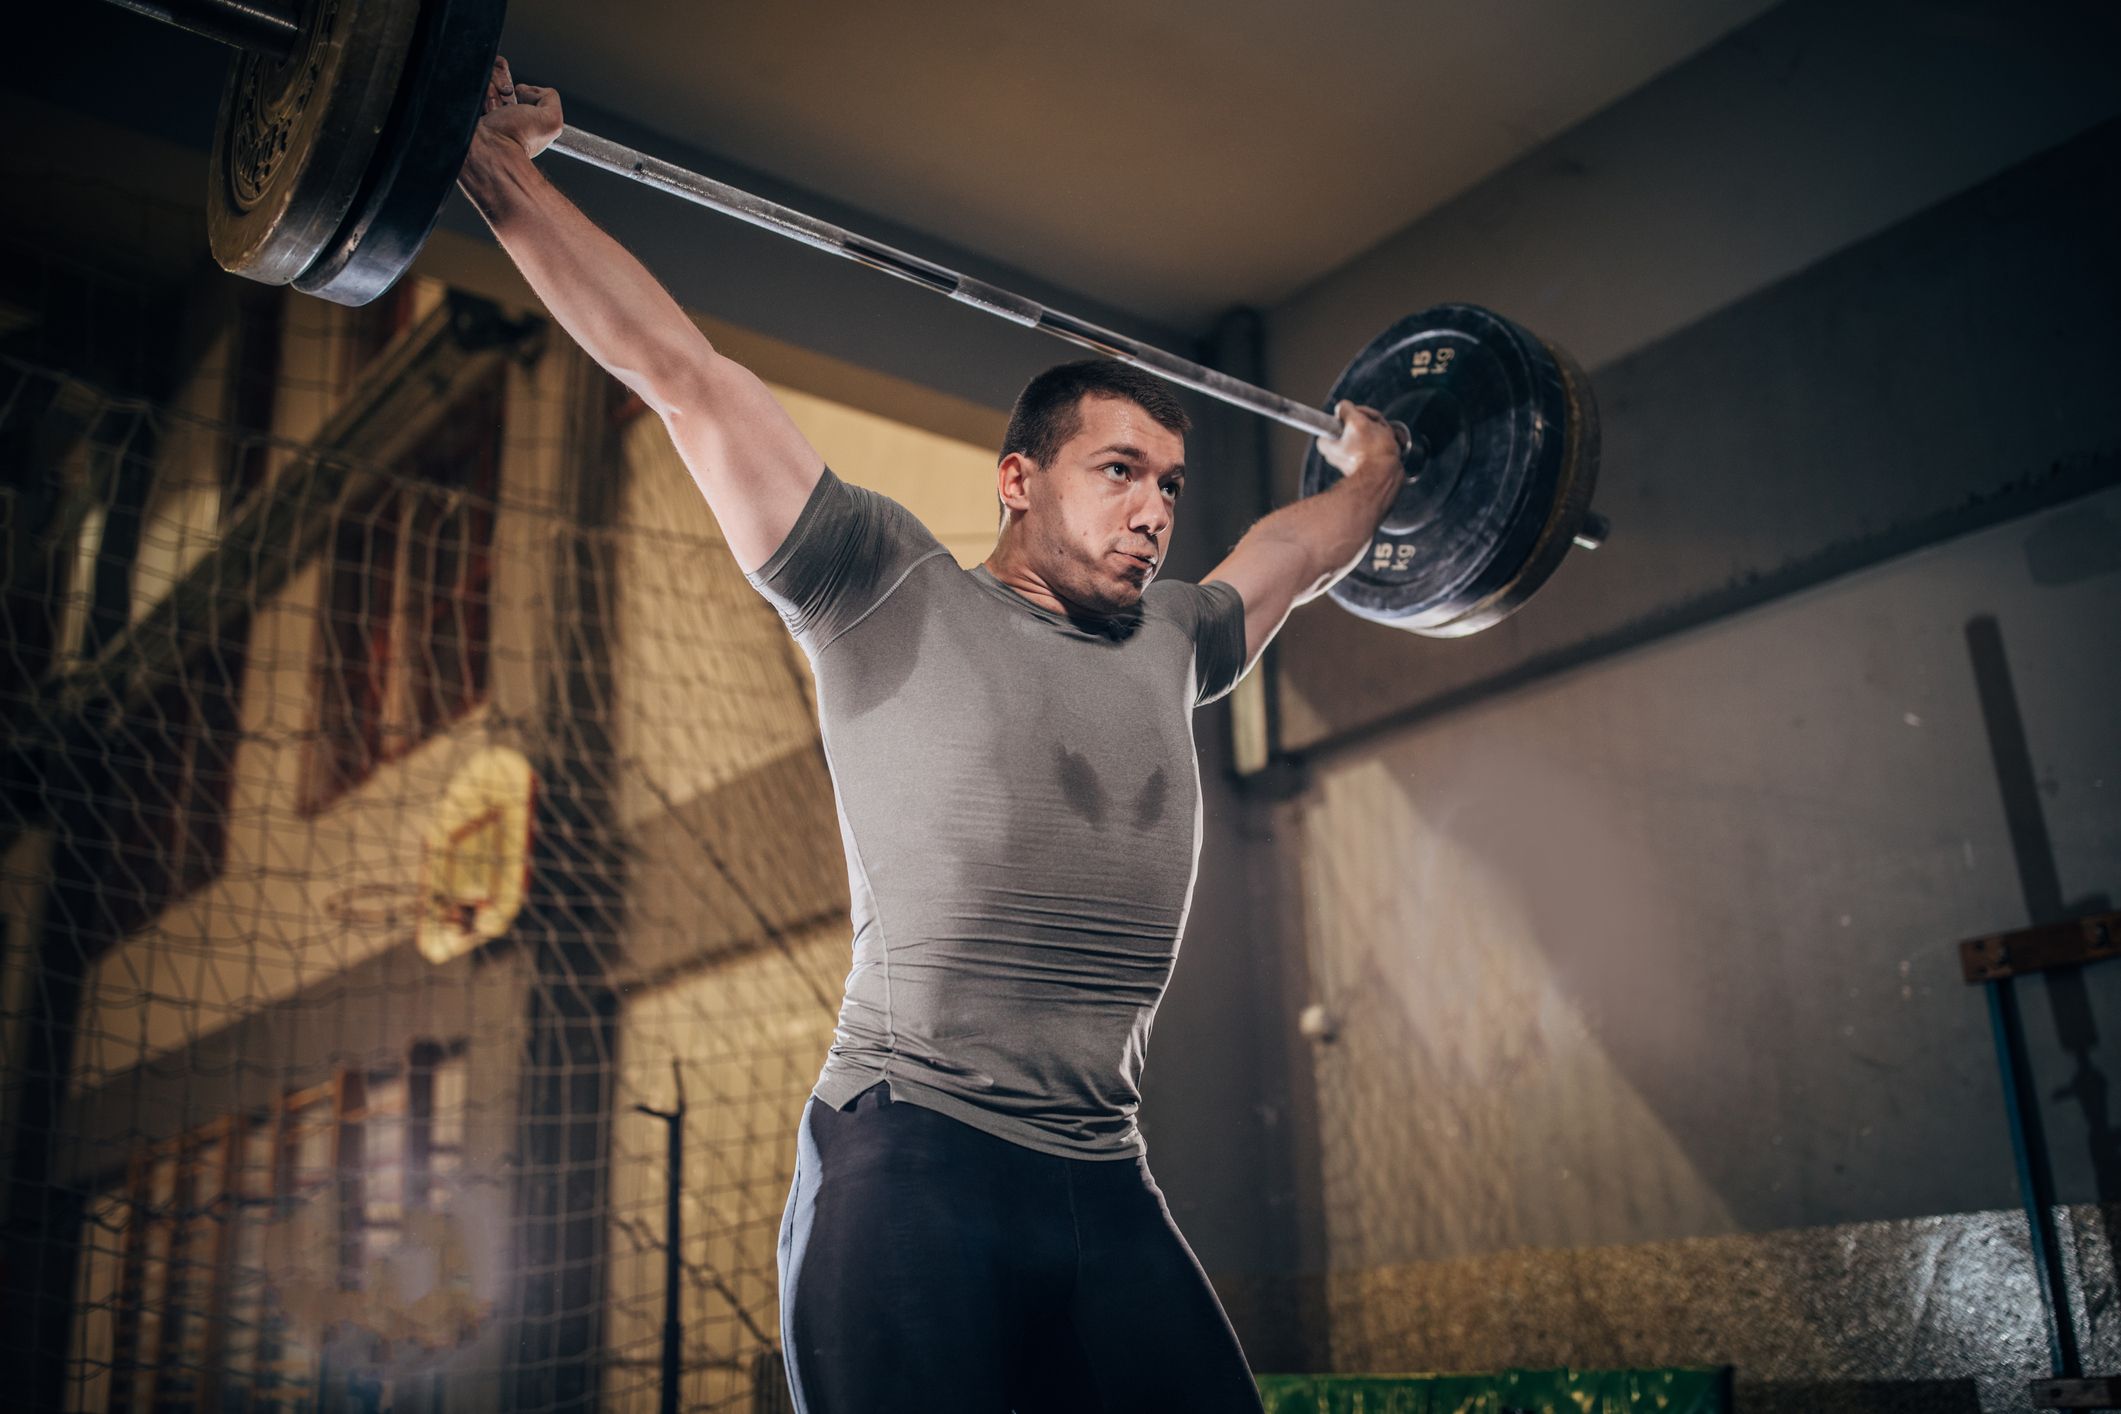 Power Snatch Exercise - What to Know About the Weightlifting Move